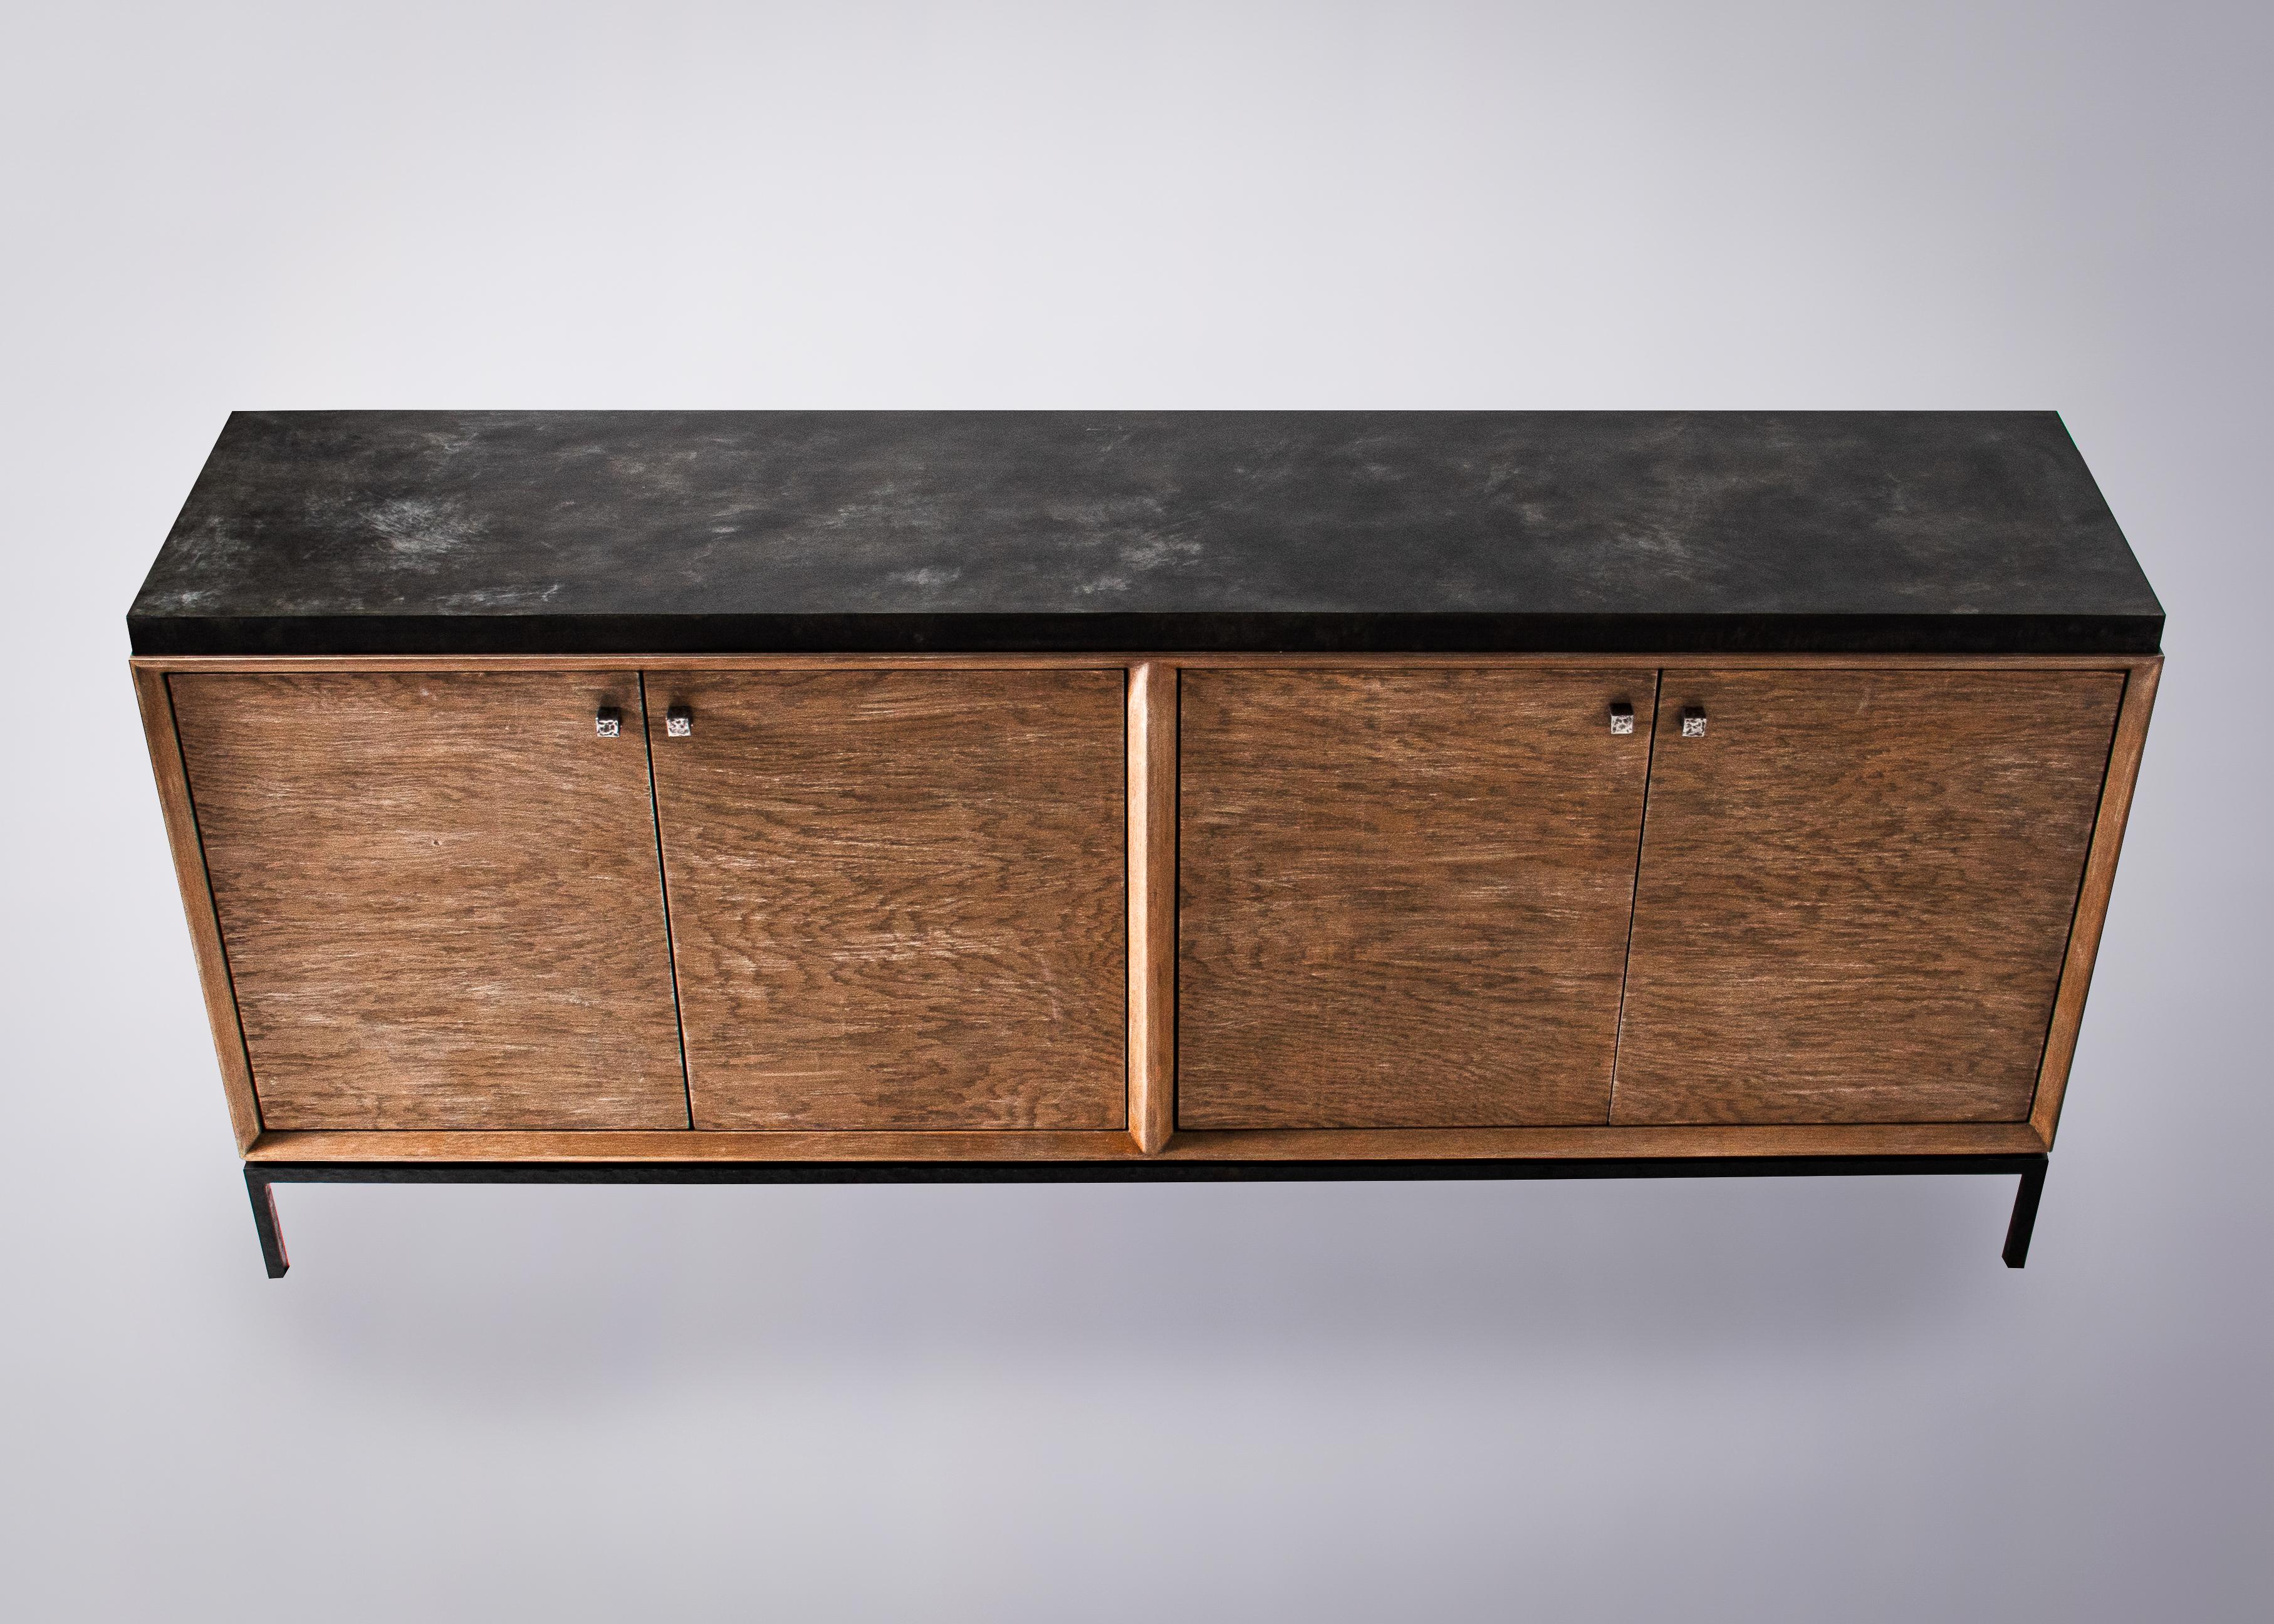 With a nod to mid-century design, this four-door cabinet is your stylish, sideboard solution.

Its custom feel is visible throughout. From the aged bronze, zinc top to the dark, hammered, steel base, this is a piece of furniture you can really call